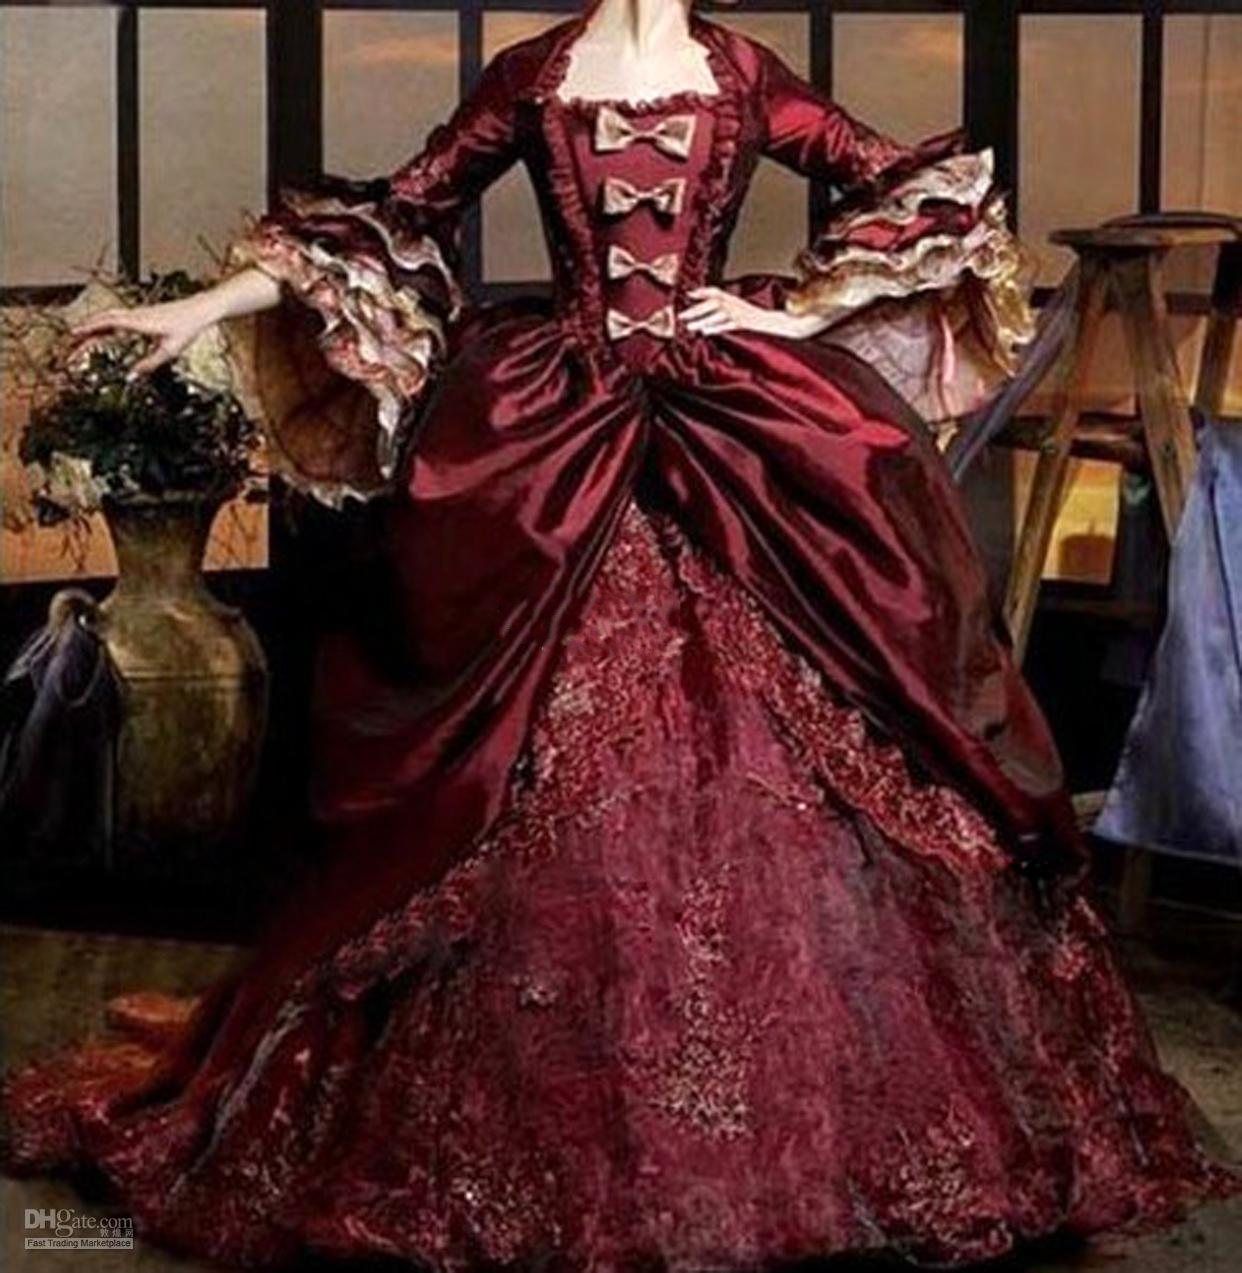 Where to Buy Red Gold Dress Renaissance Online? Where Can I Buy ...